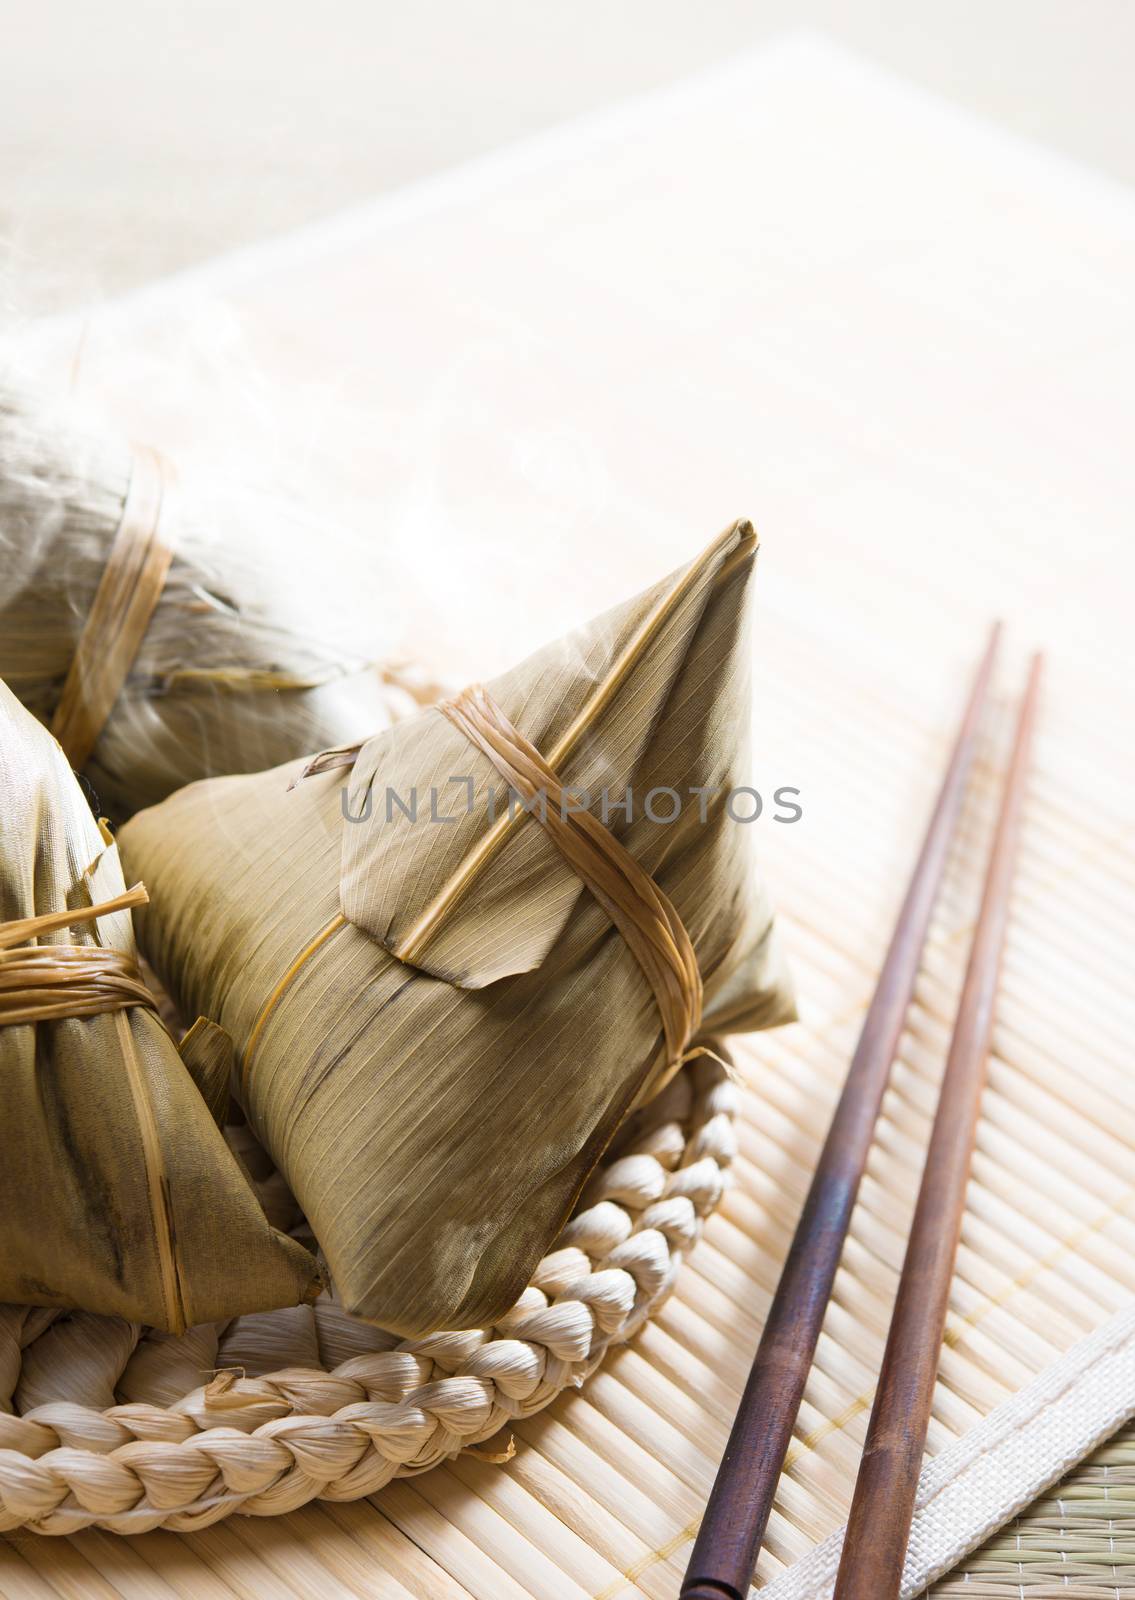 Chinese rice dumplings on bamboo place mat